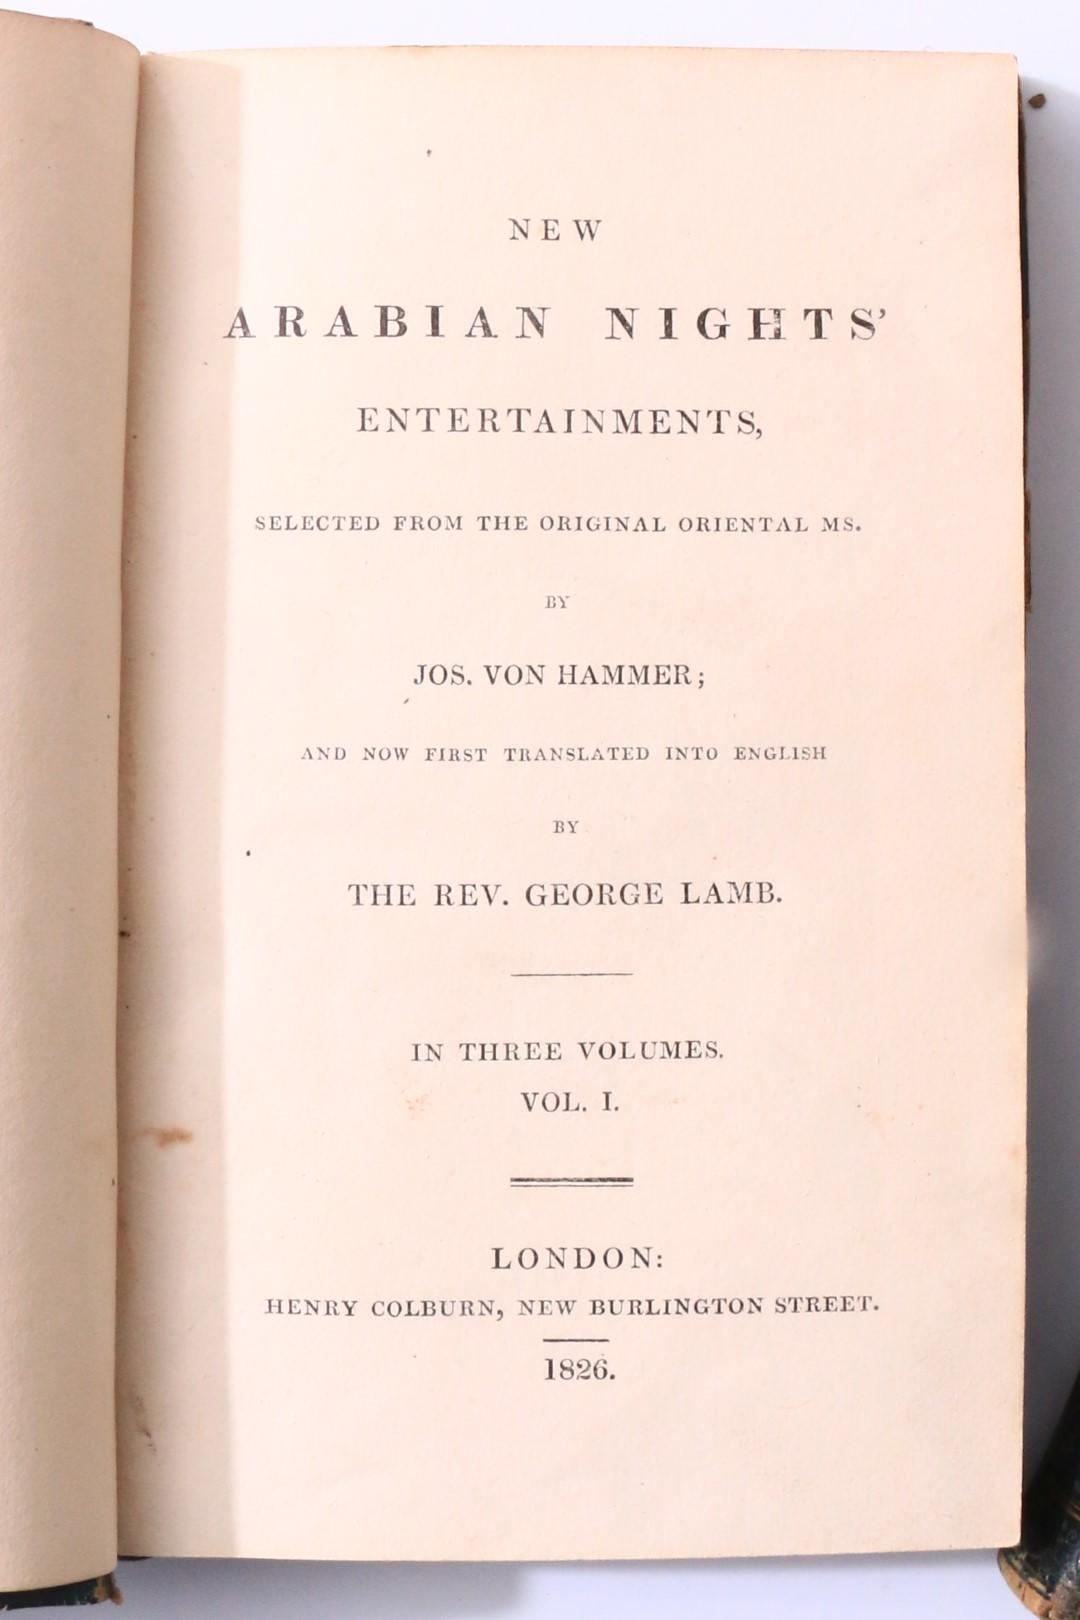 Joseph van Hammer [trans. George Lamb] - New Arabian Nights' Entertainments, Selected from the Original Oriental Ms - Henry Colburn, 1826, First Edition.